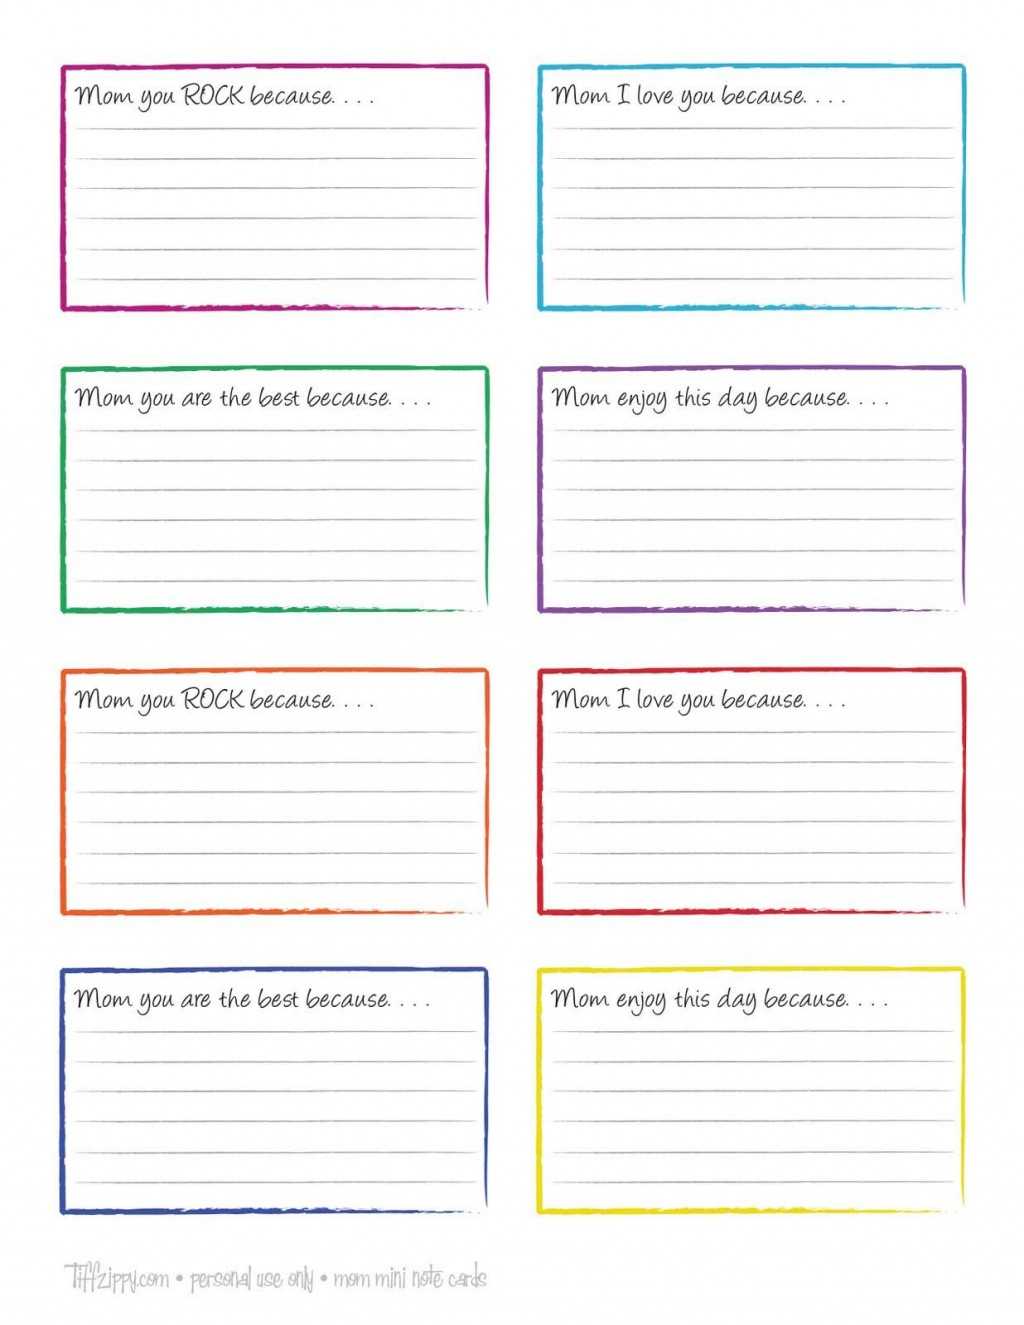 004 Free 4X6 Note Card Template Post Exceptional Ideas For 4X6 Note Card Template